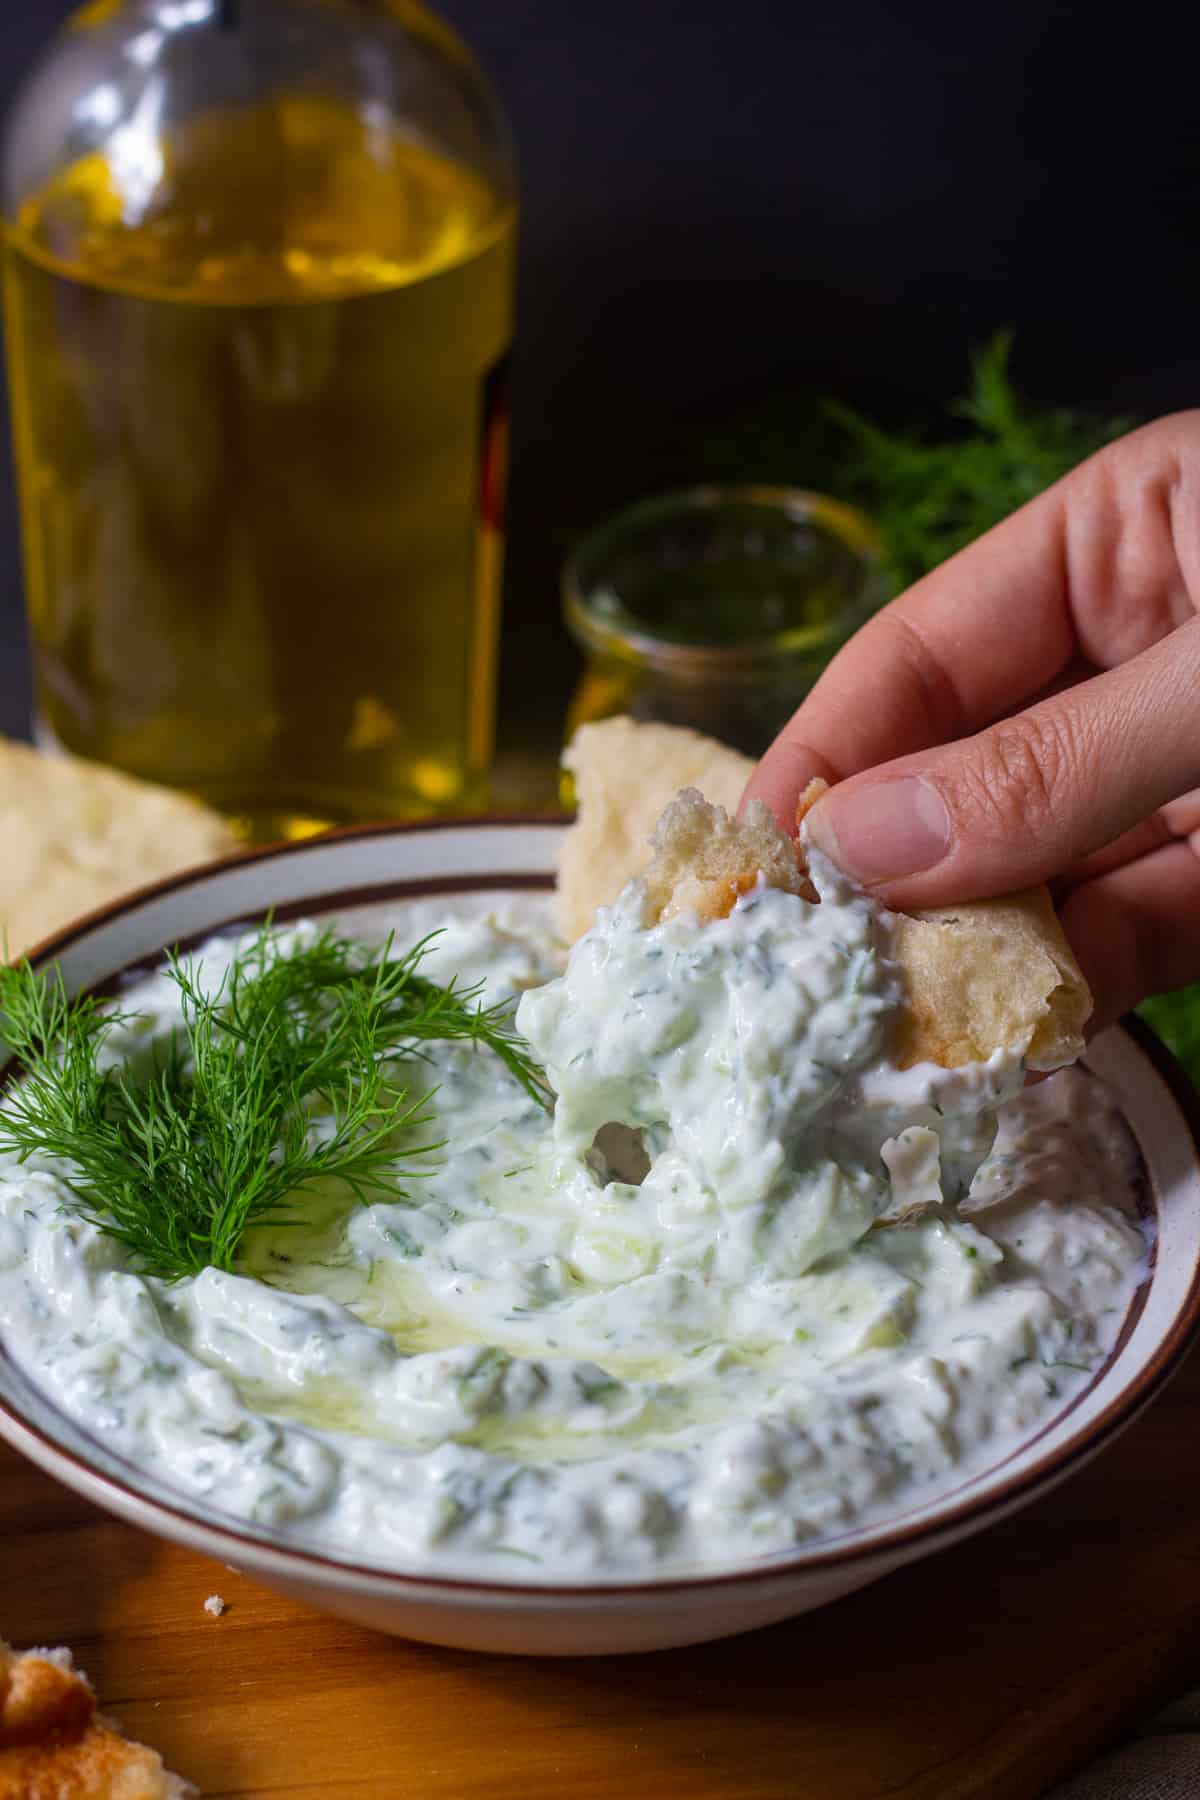 This classic tzatziki recipe is made with just a few ingredients and will be ready in only 10 minutes. It's perfect for vegetables, meat, or simply as a dip. Check out our video and step-by-step tutorial.
